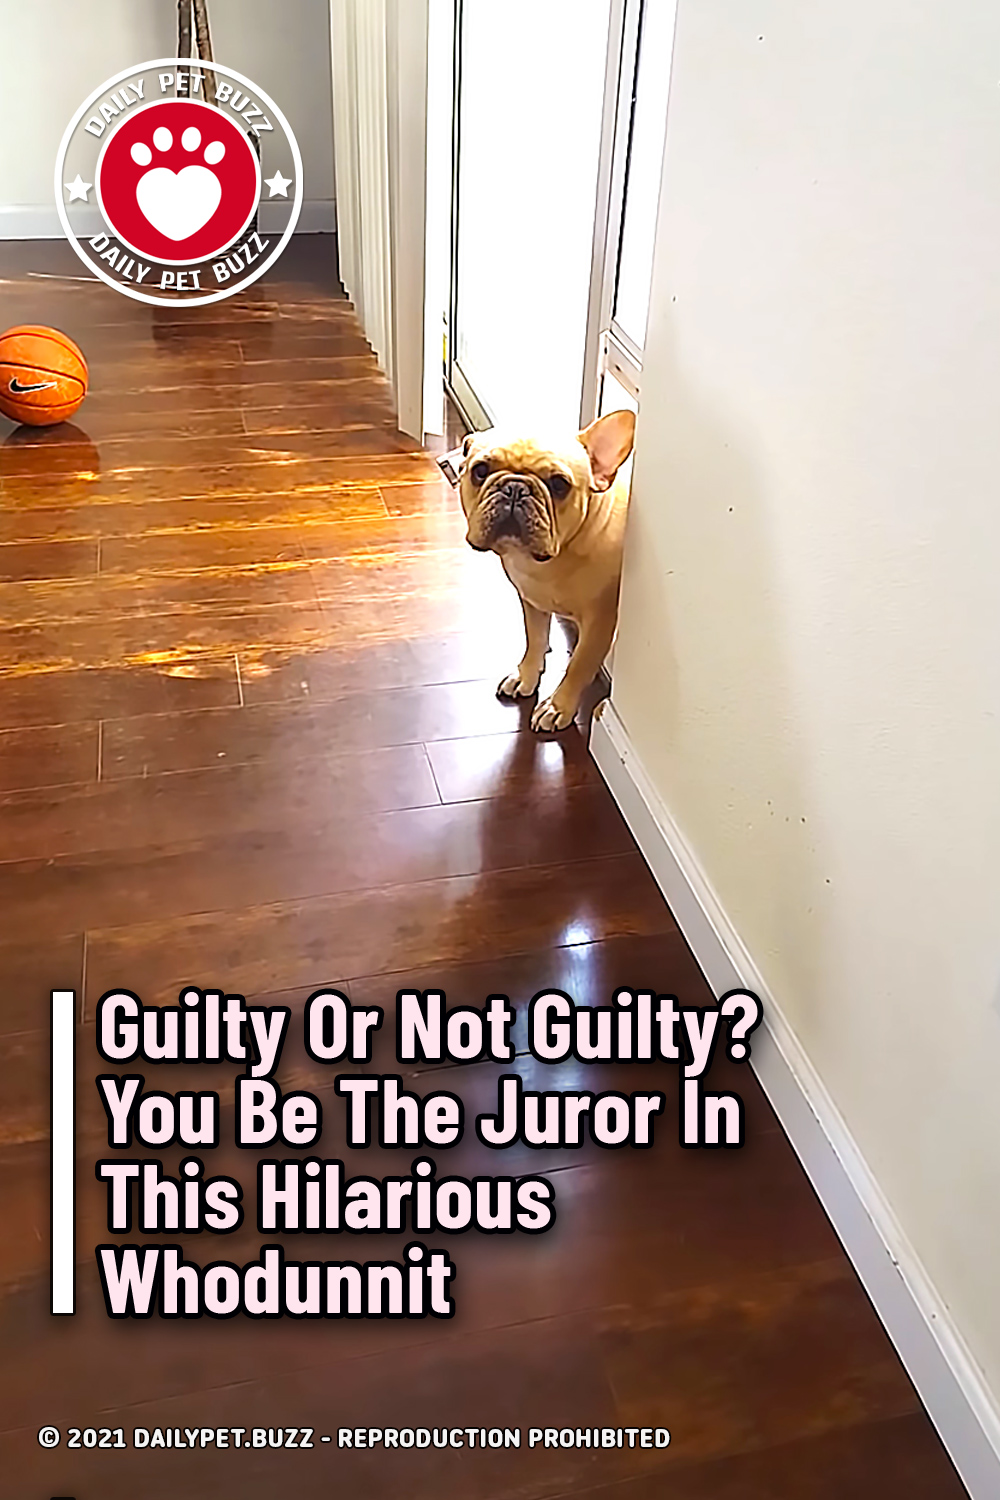 Guilty Or Not Guilty? You Be The Juror In This Hilarious Whodunnit